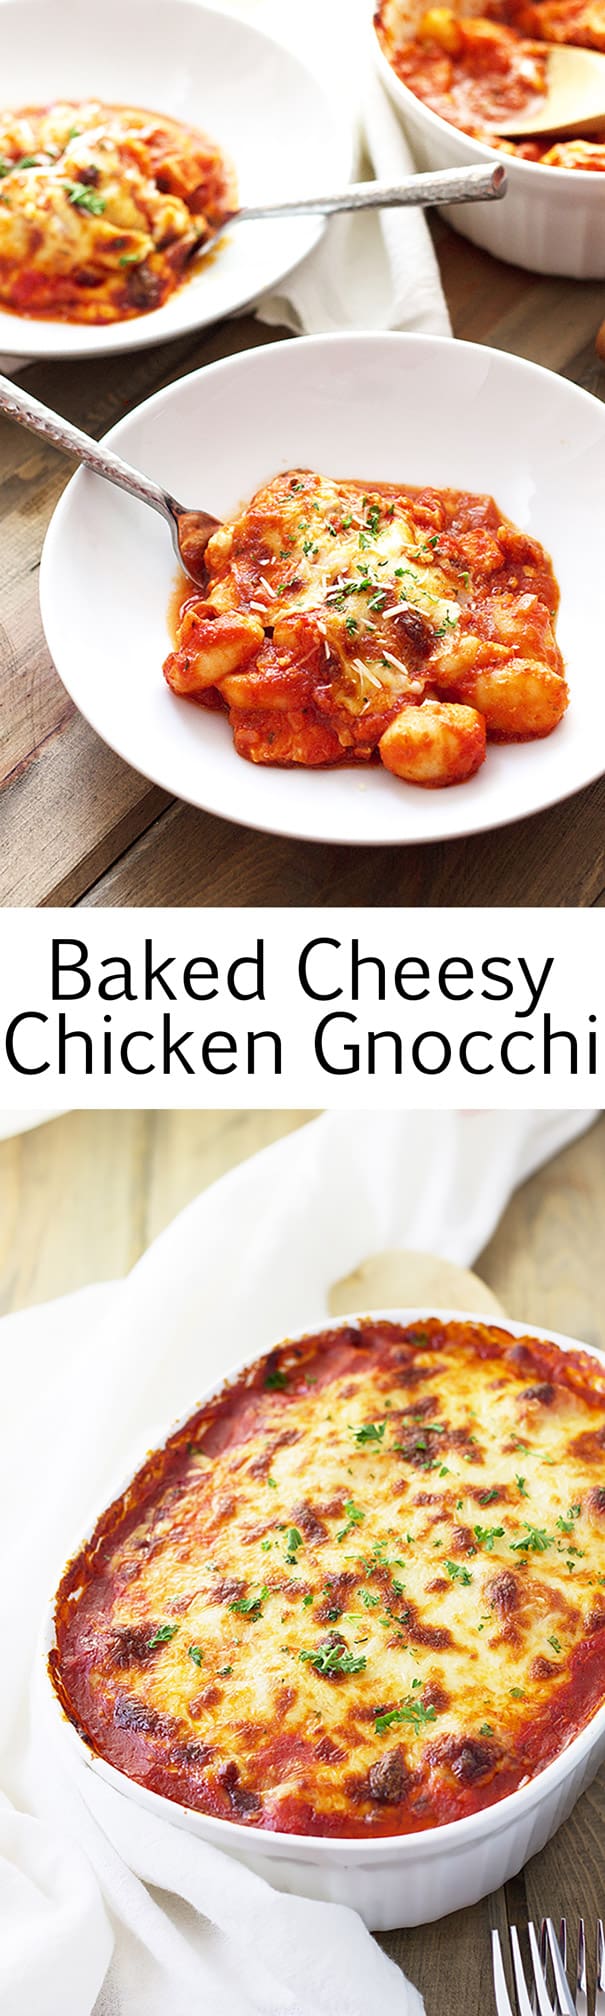 Baked Cheesy Chicken Gnocchi- this dish is the ultimate comfort food! Loaded with melted cheese, chicken and fluffy gnocchi. | countrysidecravings.com